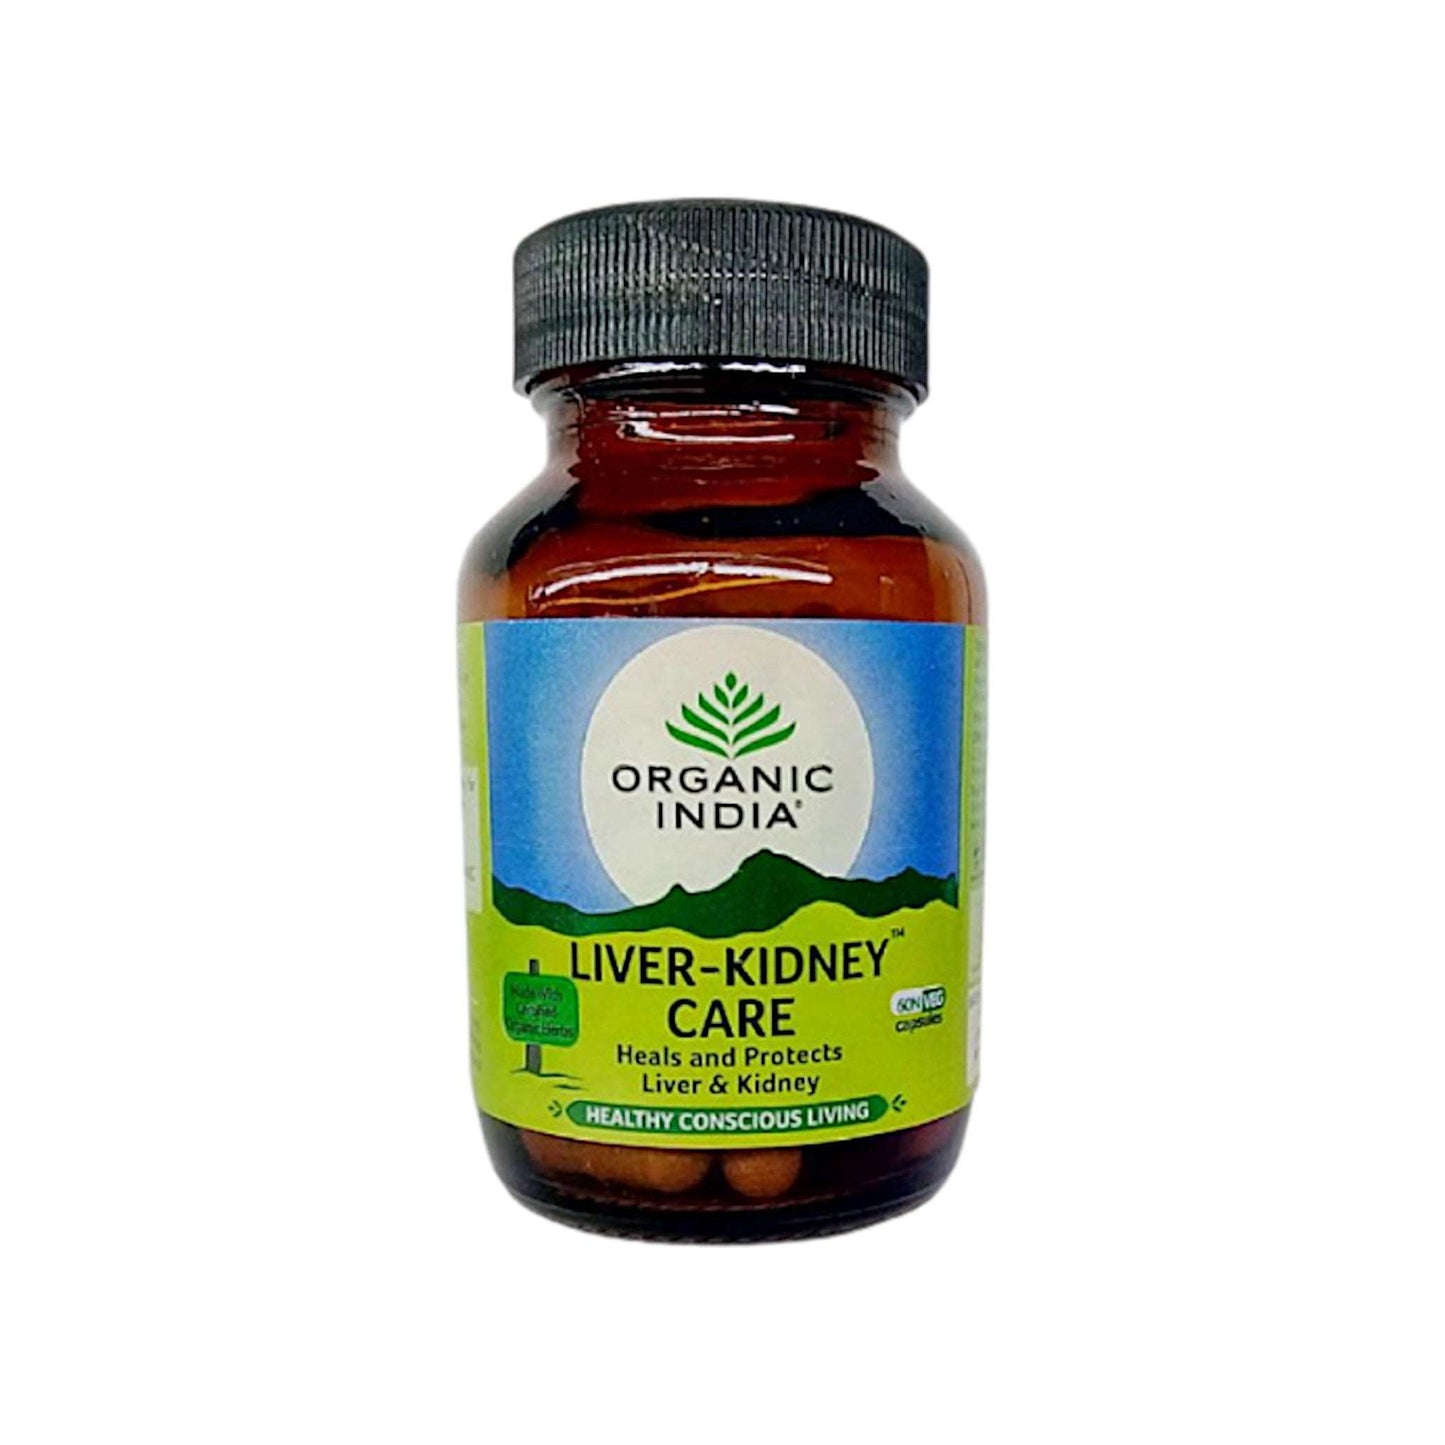 Image: Organic India Liver-Kidney Care 60 Capsules - 100% organic formula for liver and kidney health.